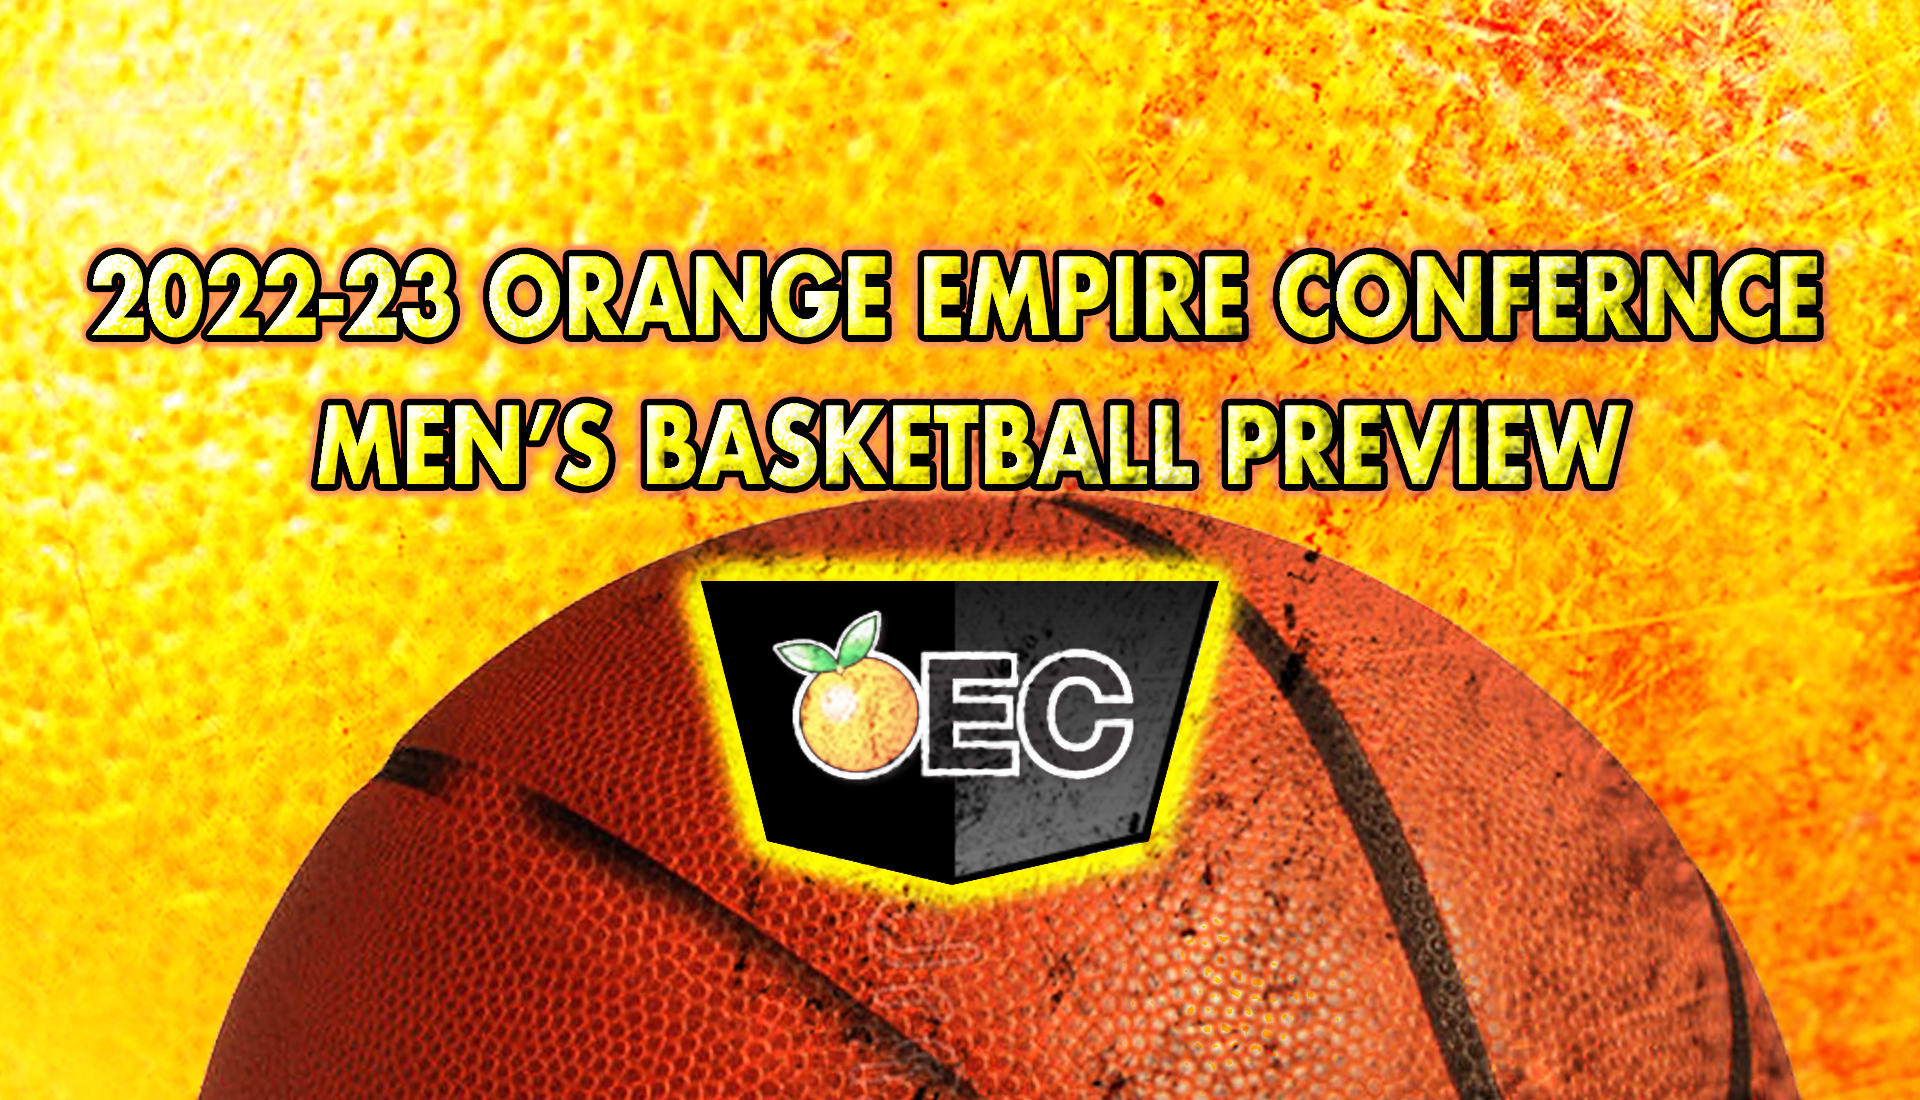 2022-23 OEC MBKB PREVIEW